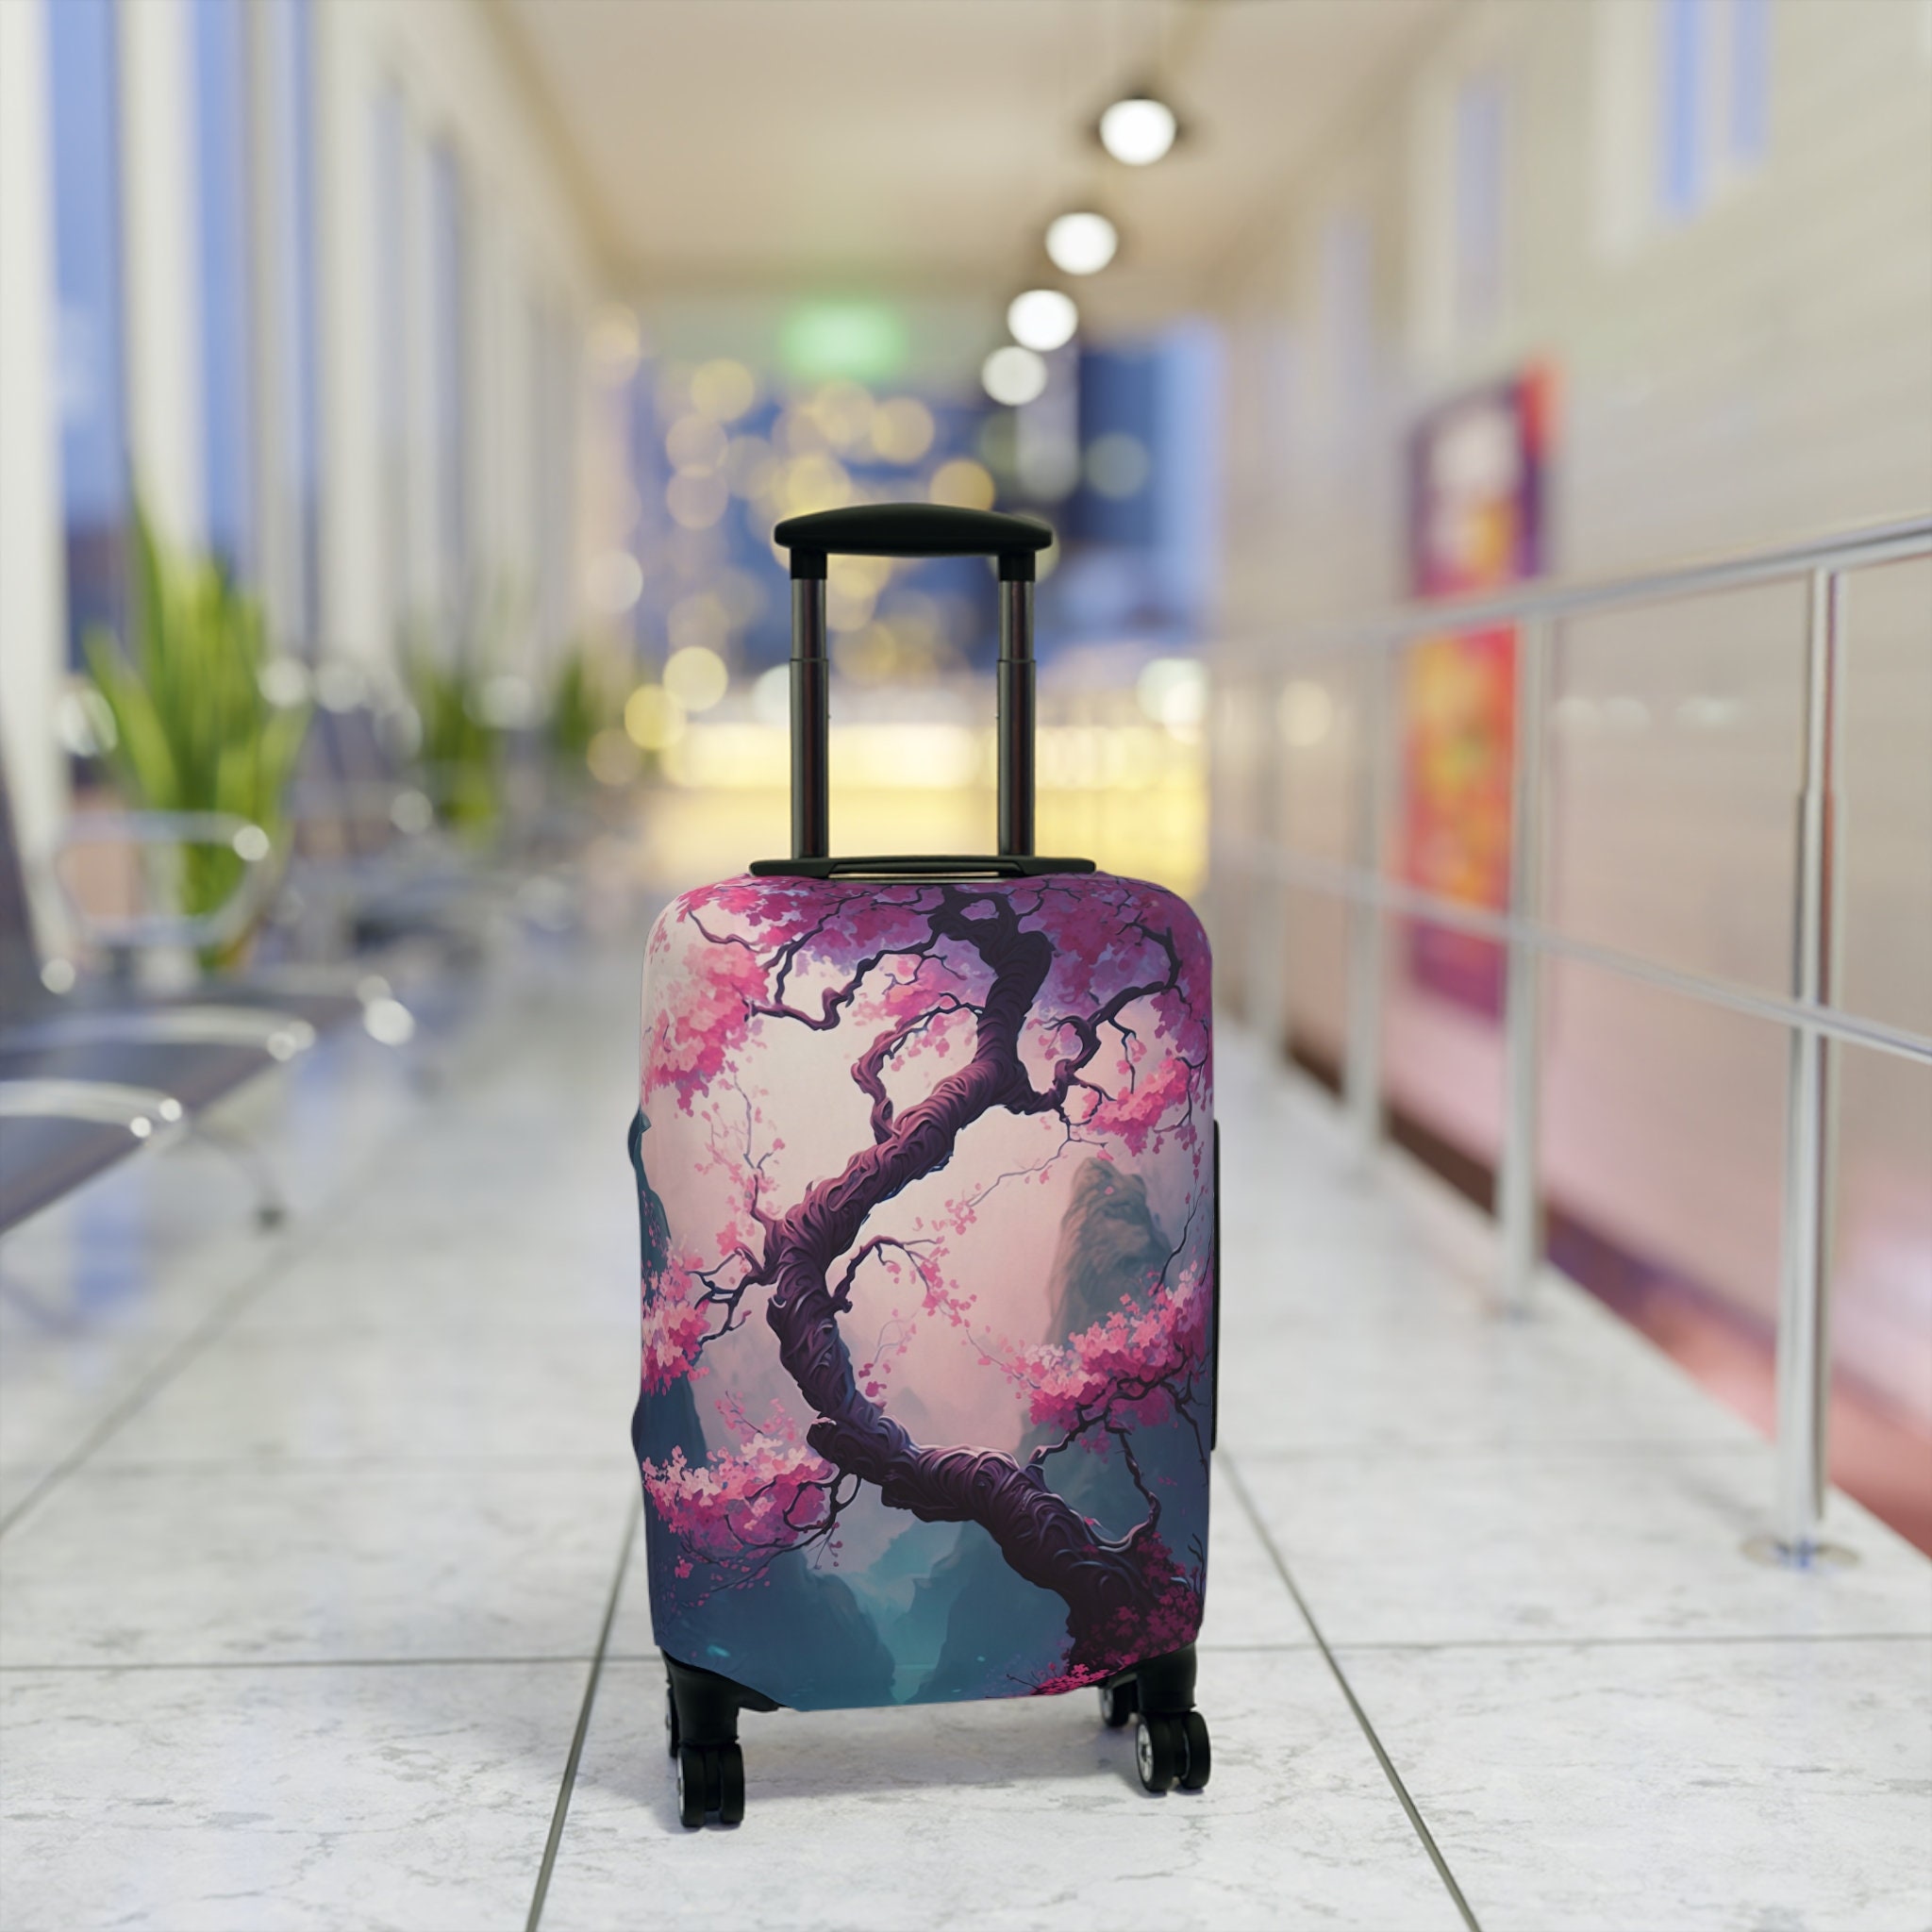 Cherry Blossom Luggage Cover, Colorful Travel Gifts